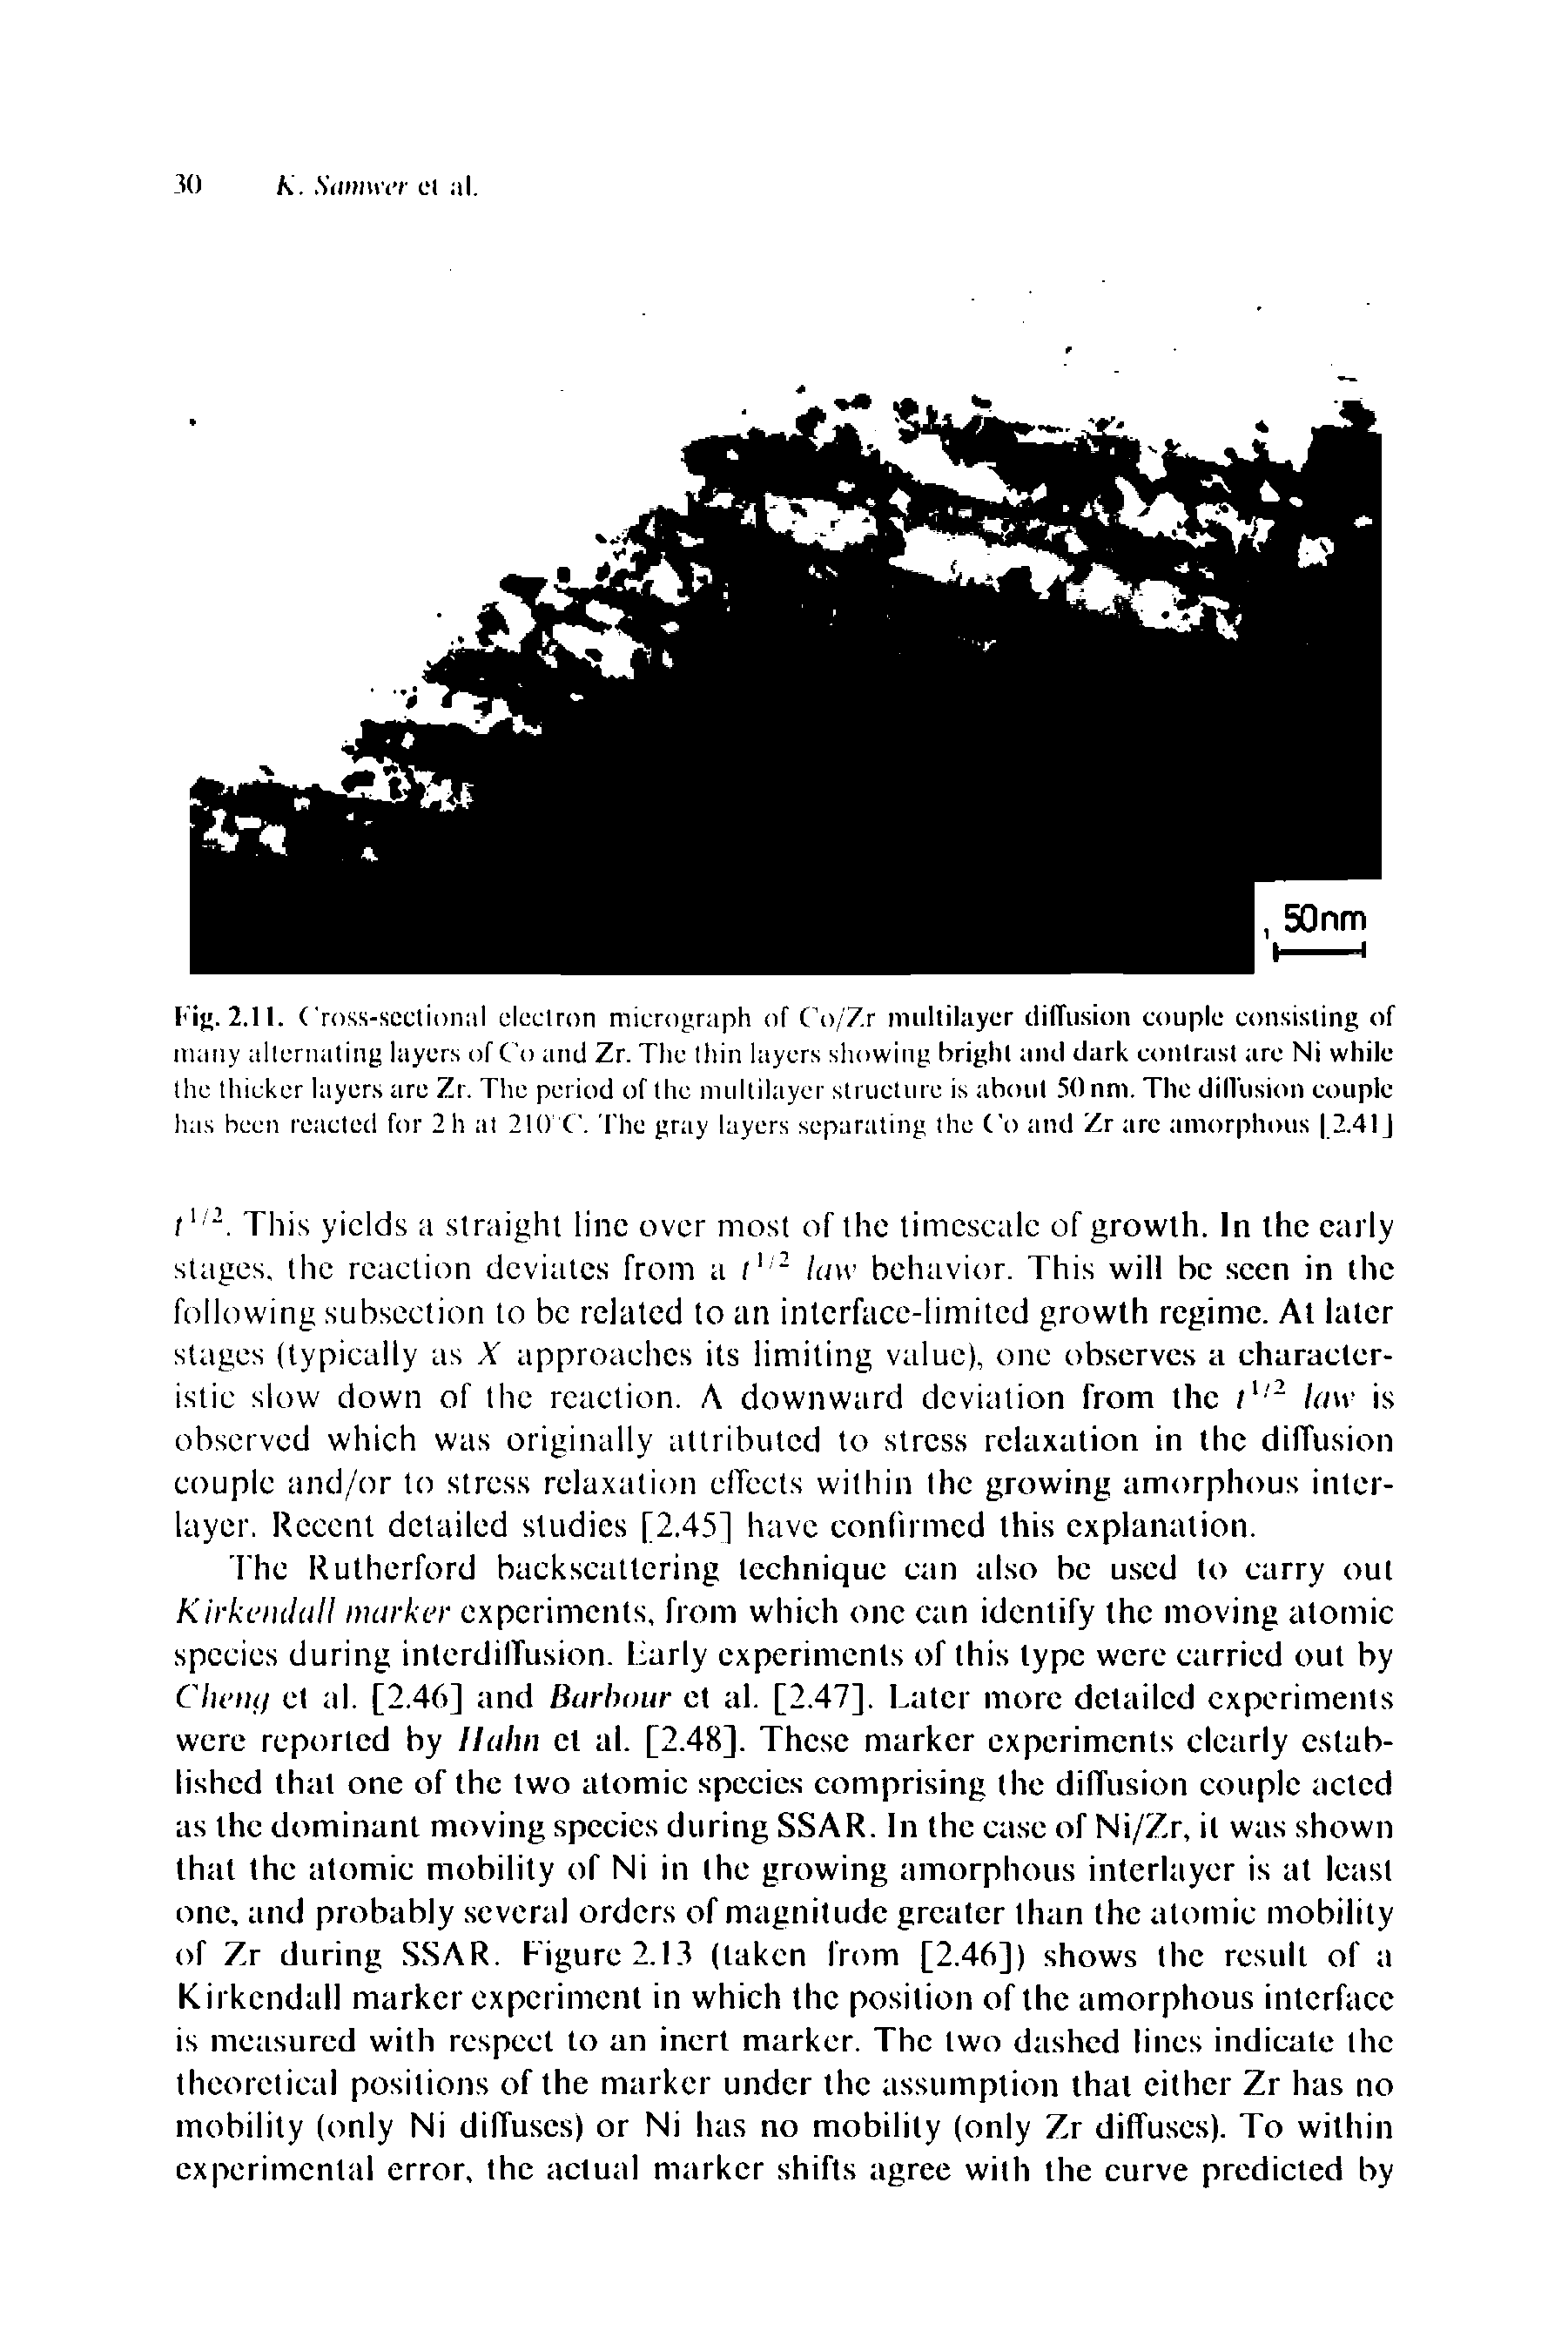 Fig. 2.11. Cross-sectional electron micrograph of Co/Zr multilayer diffusion couple consisting of many alternating layers of Co ami Zr. The thin layers showing bright and dark contrast are Ni while the thicker layers are Zr. The period of the multilayer structure is about 50 nm. The diffusion couple has been reacted for 2 h at 210 C. The gray layers separating the Co and Zr are amorphous 2.41 J...